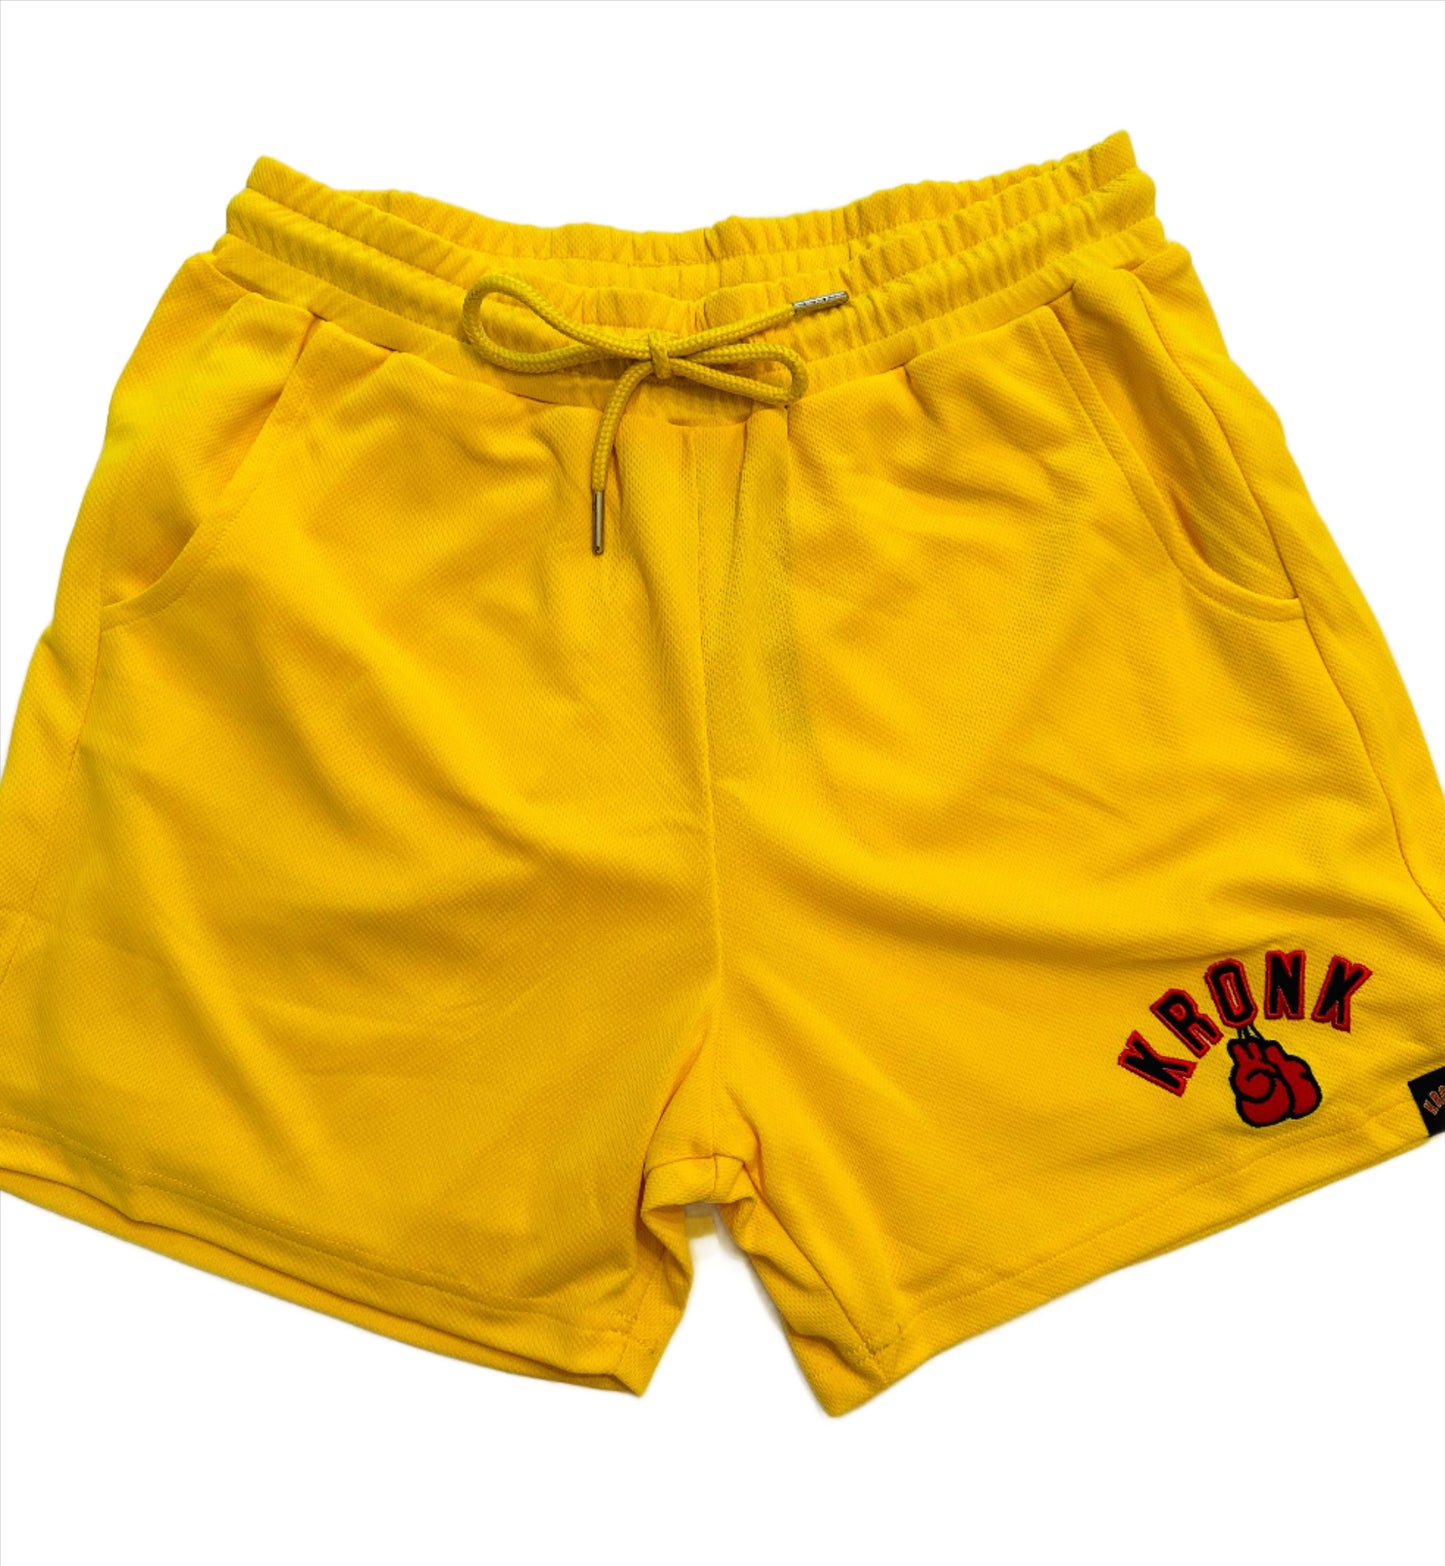 KRONK Gloves Applique Lined Gym Shorts Yellow